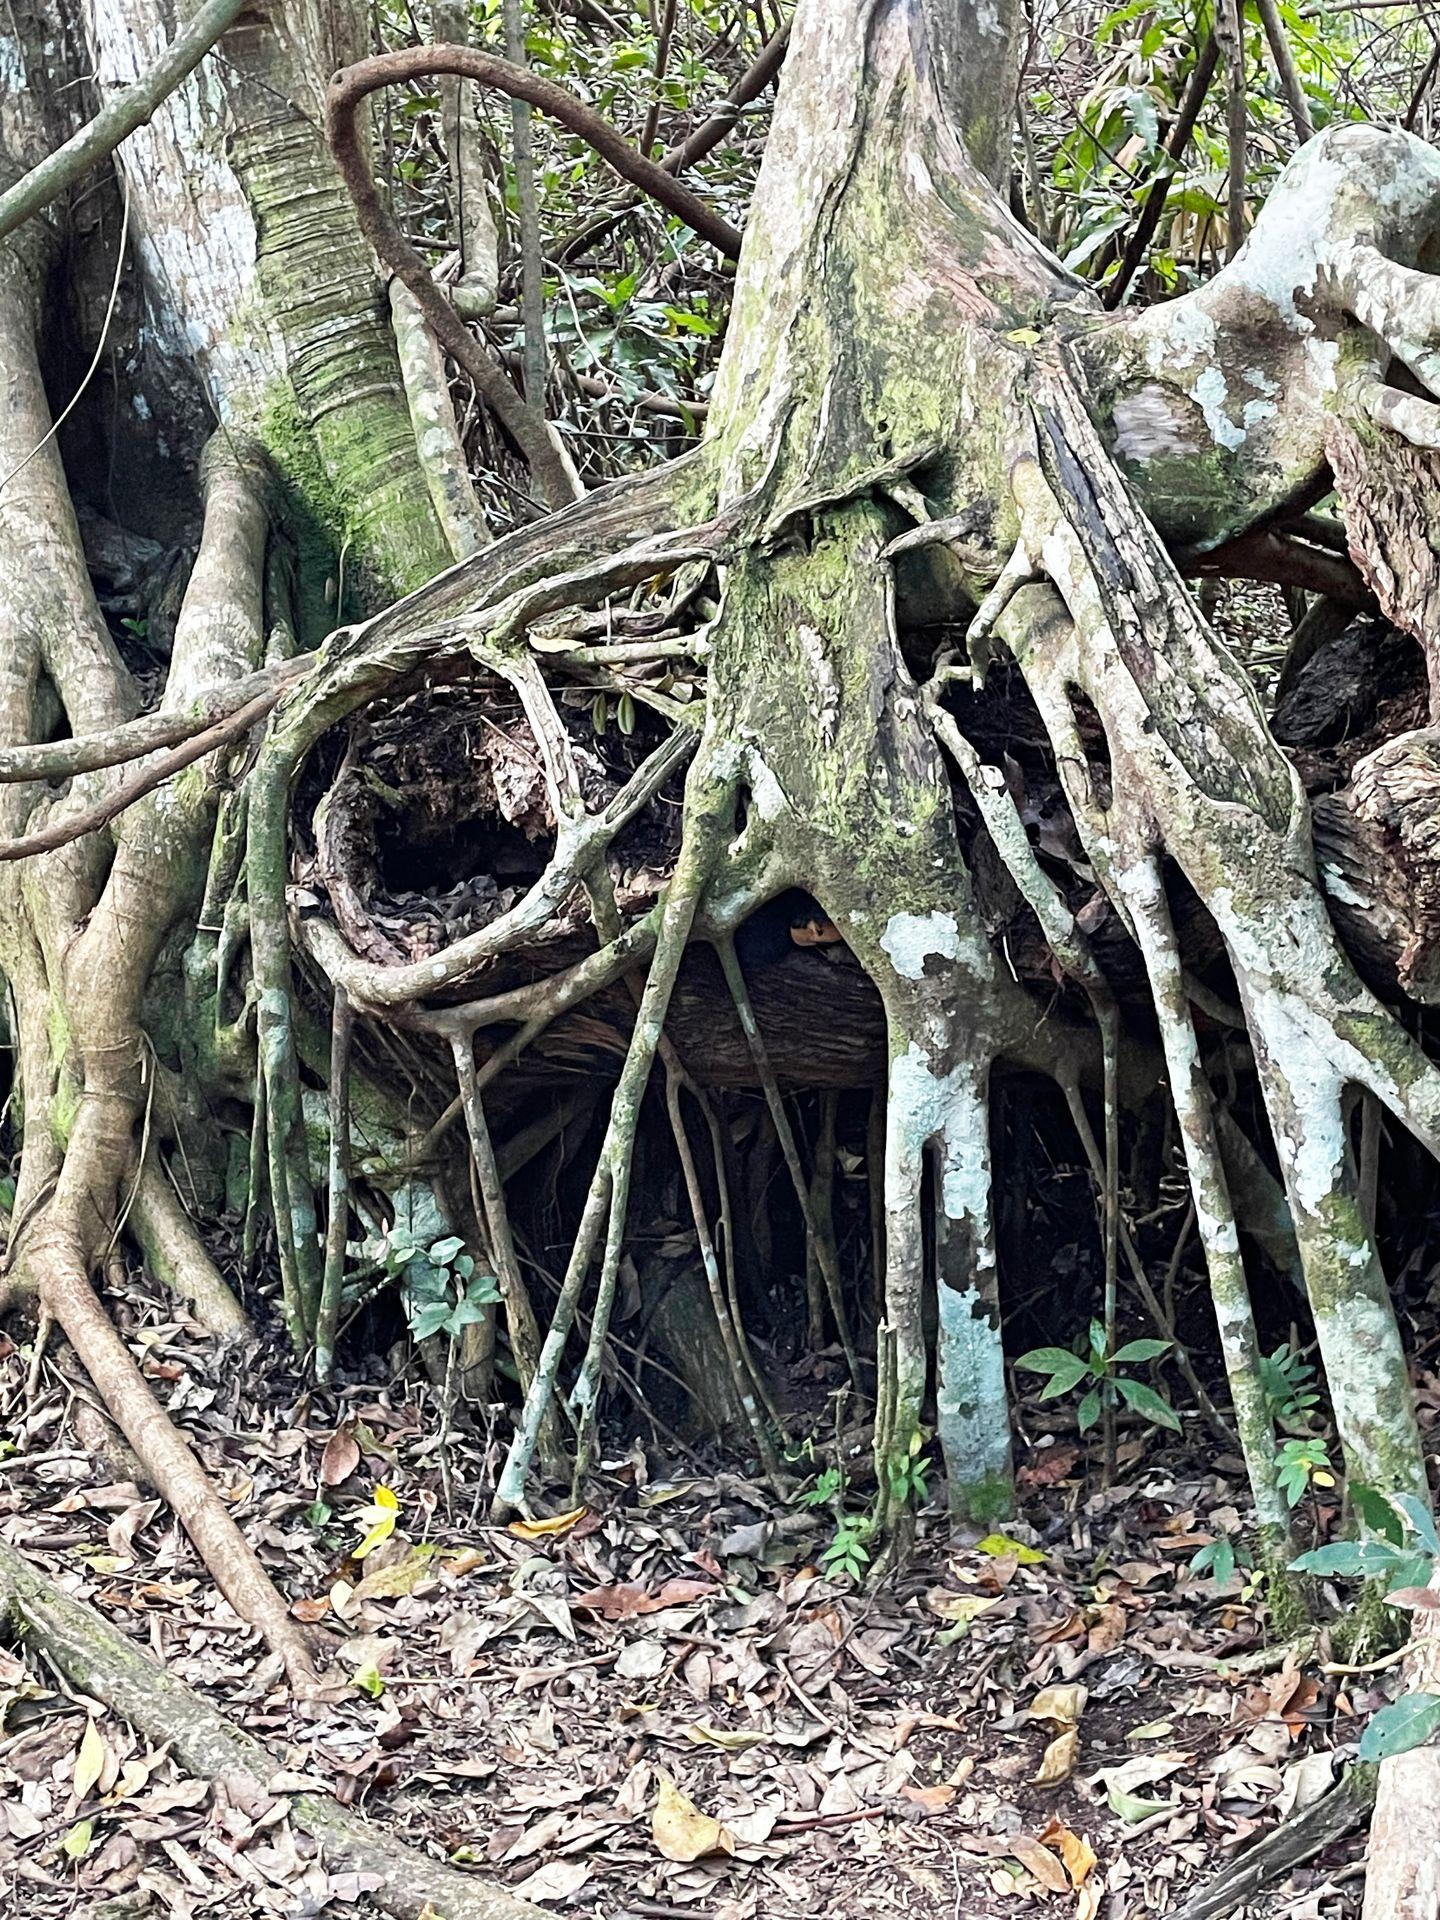 Tree roots twisting around each other along the Gumbo Limbo Trail.